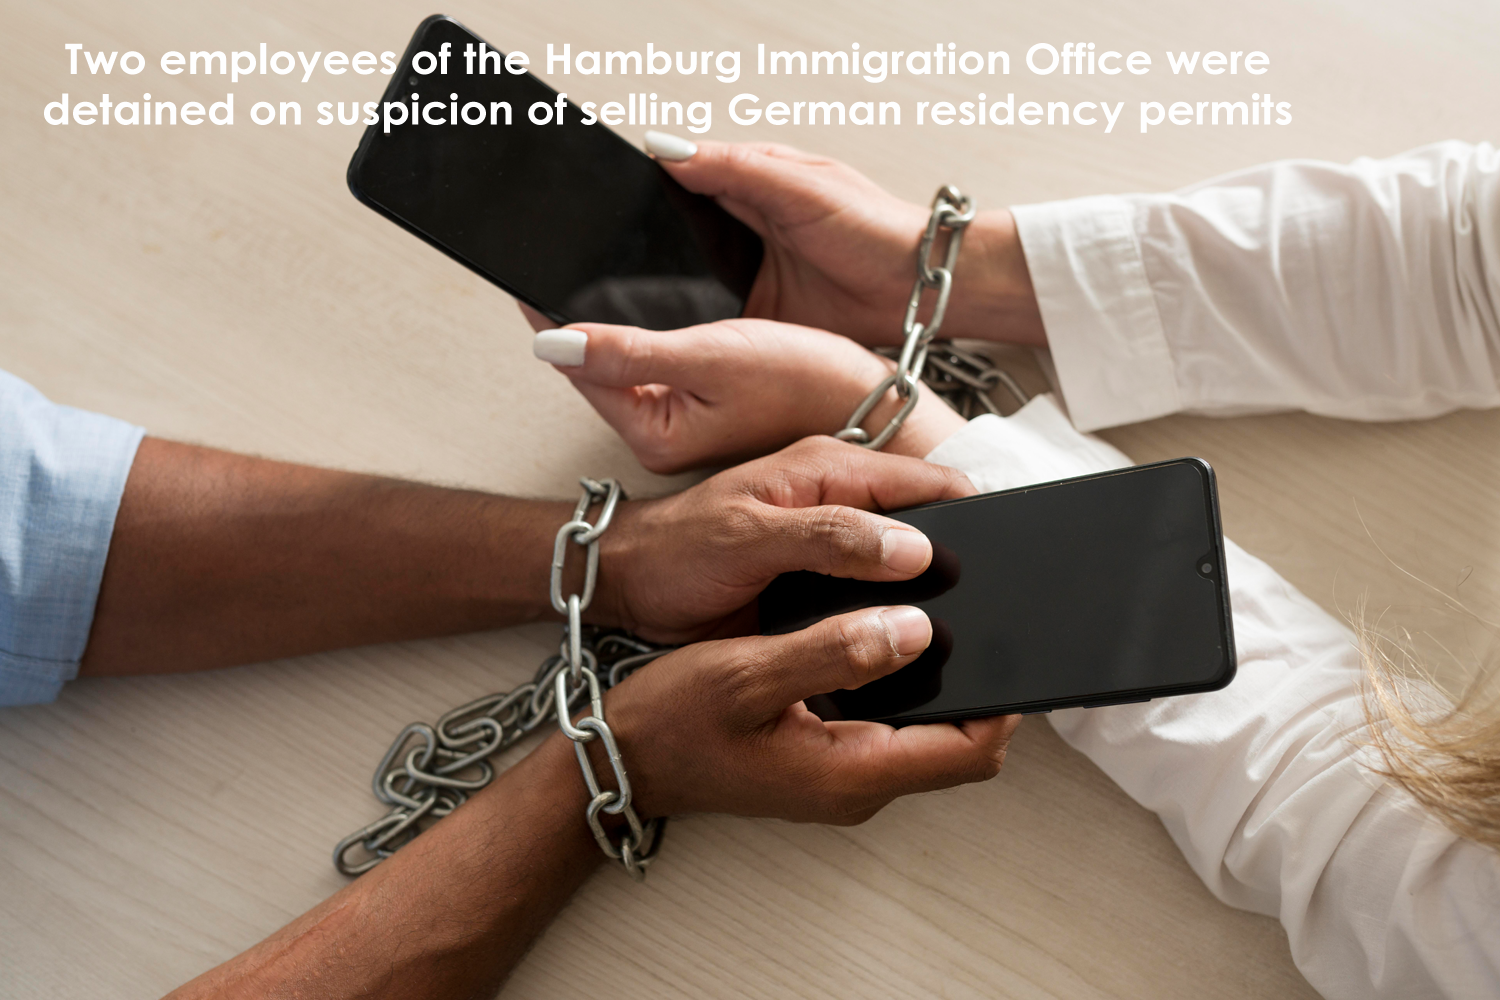 Two employees of the Hamburg Immigration Office were detained on suspicion of selling German residency permits.